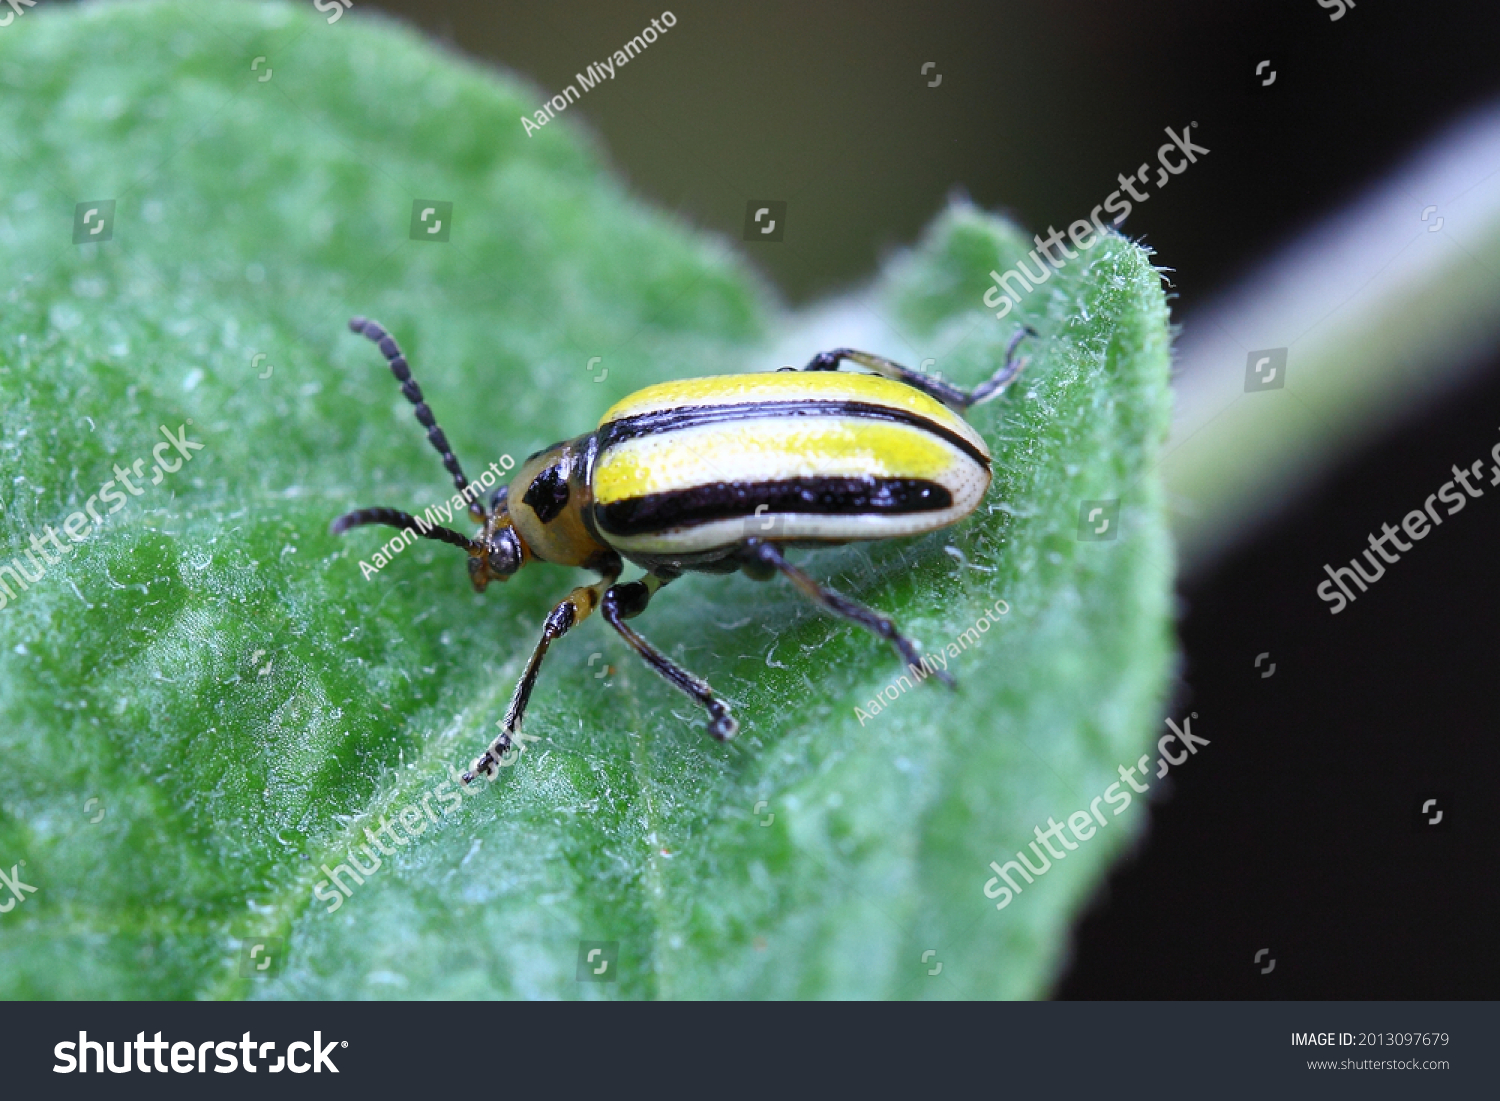 Striped Cucumber Beetle is a common garden pest. Beautiful color but a bad insect for the gardener #2013097679